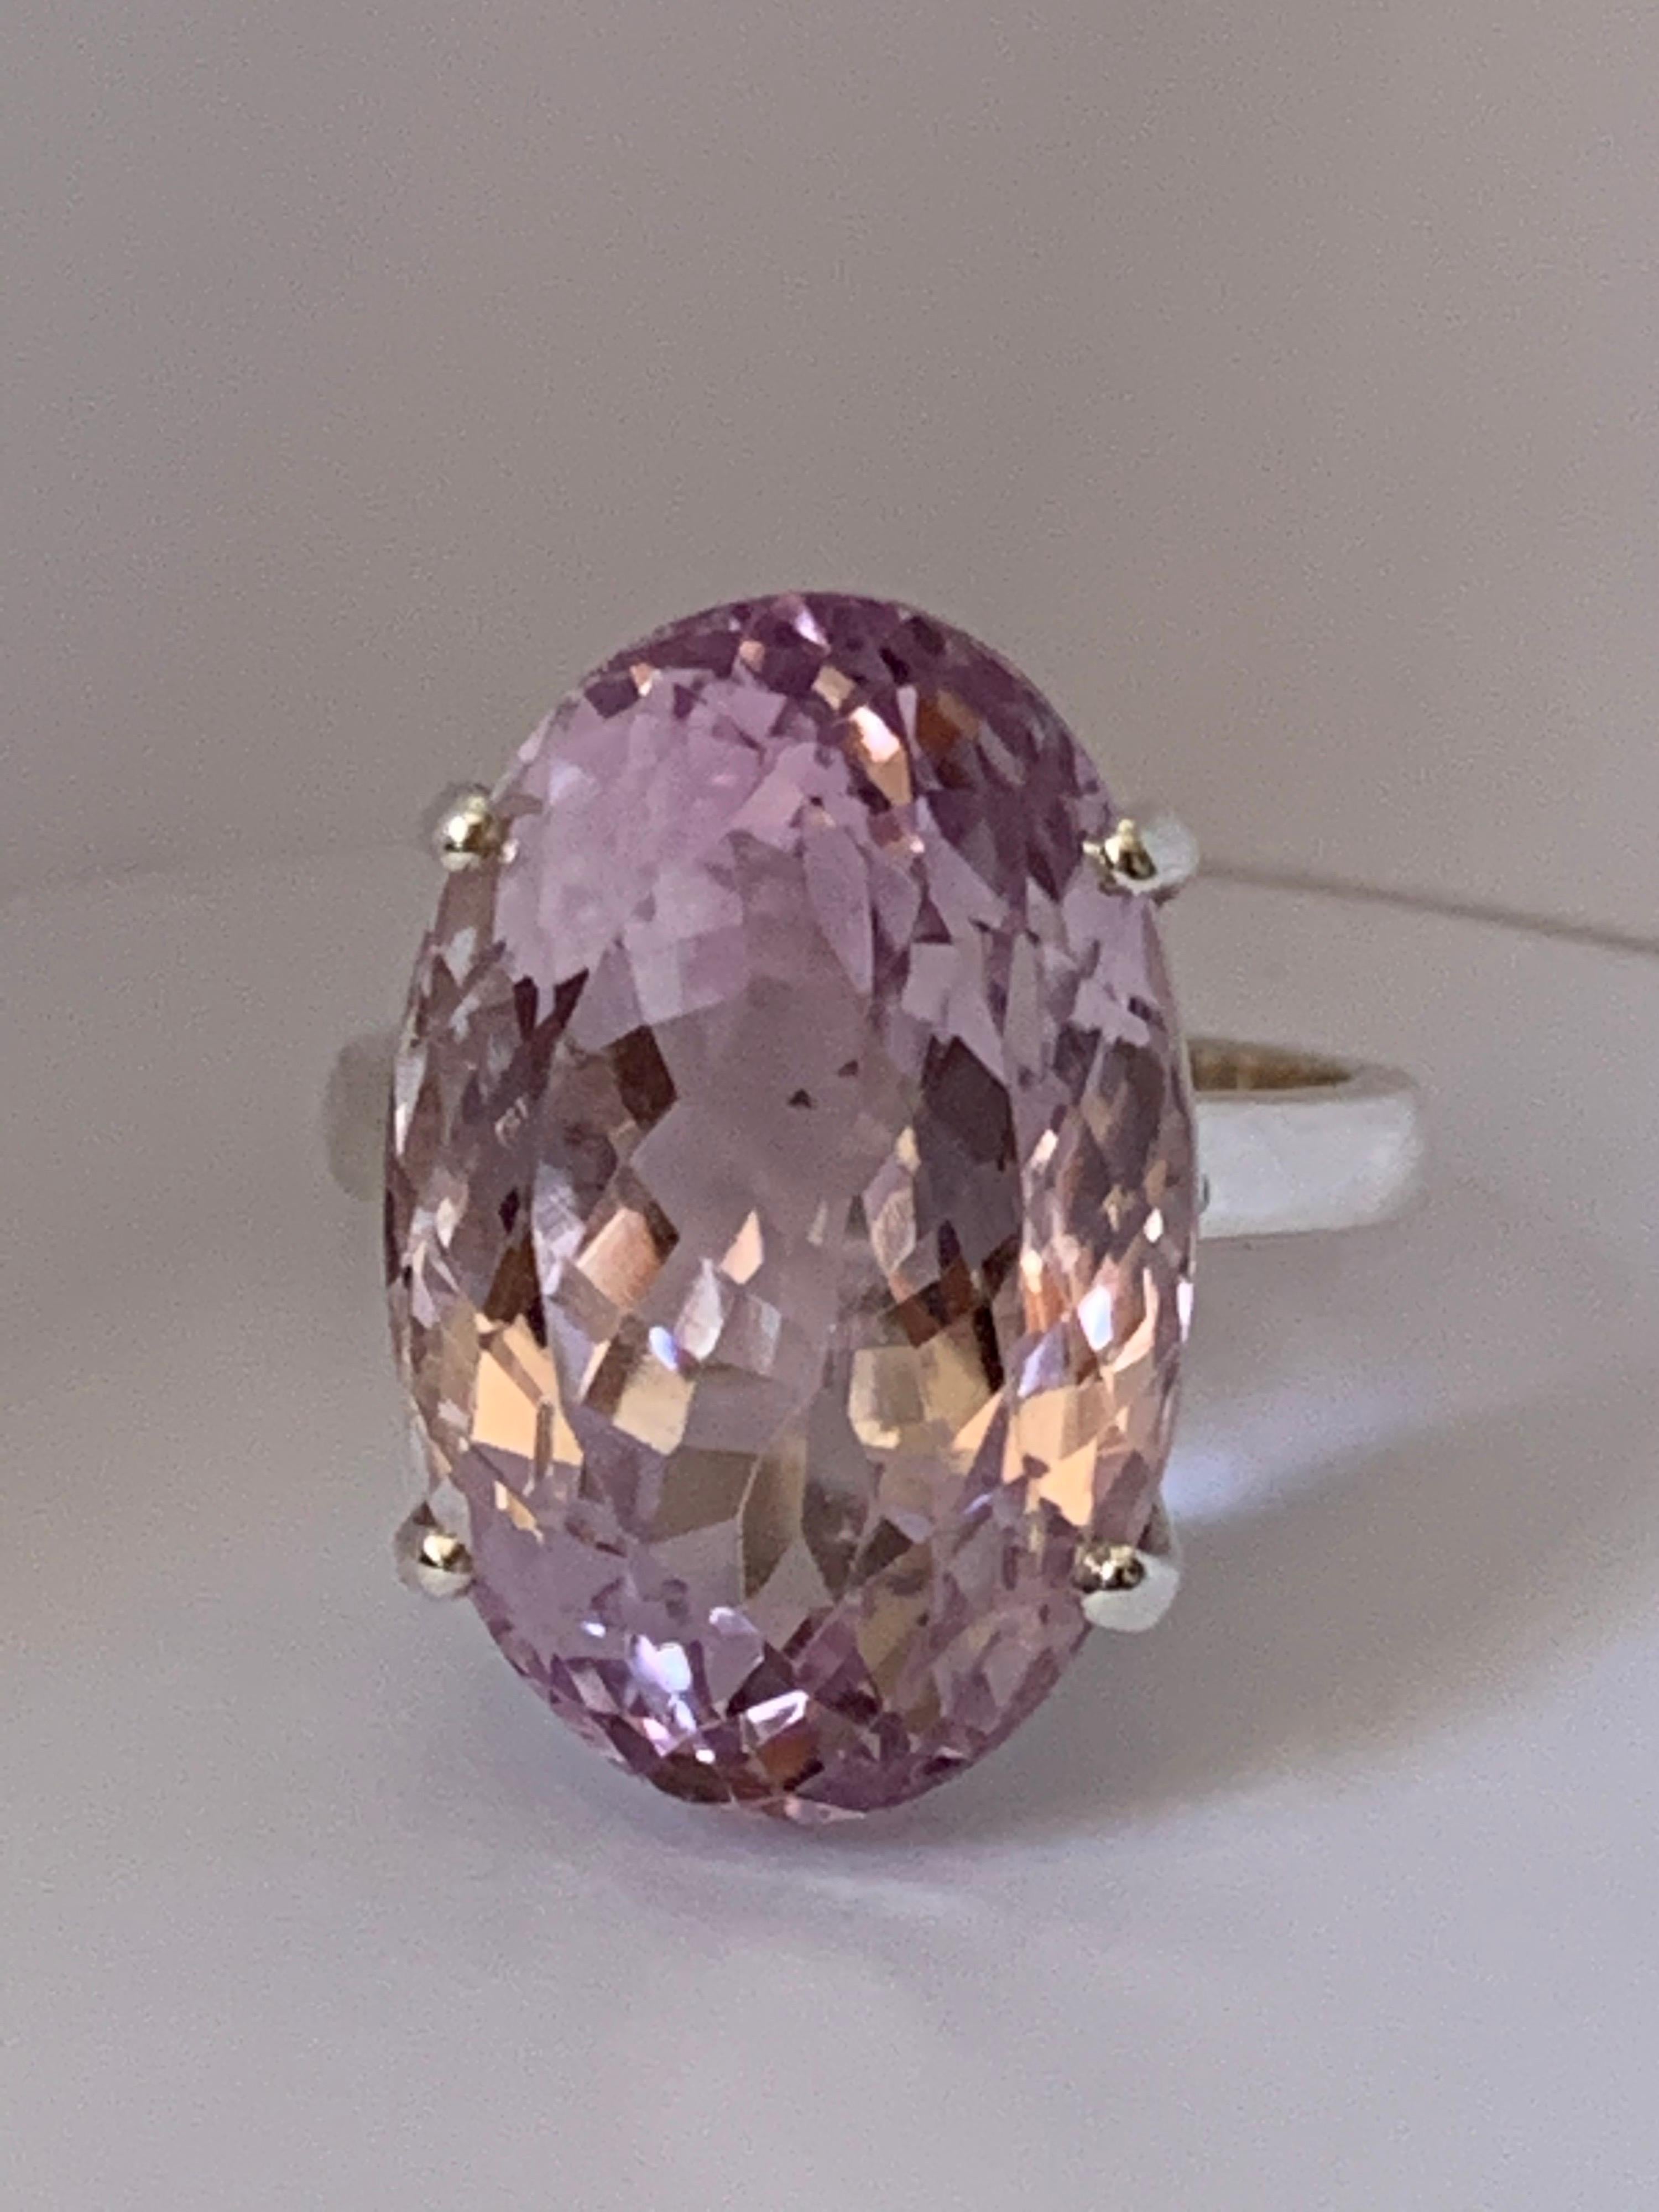 Light Pink Oval Amethyst Sterling silver Ring is 100% handcrafted ring, This is not a mass produced ring. The size of the stone is 13mm X 20mm. The color of the stone is very close to Kunzite. stone is about 20 carat. The stone is natural and no